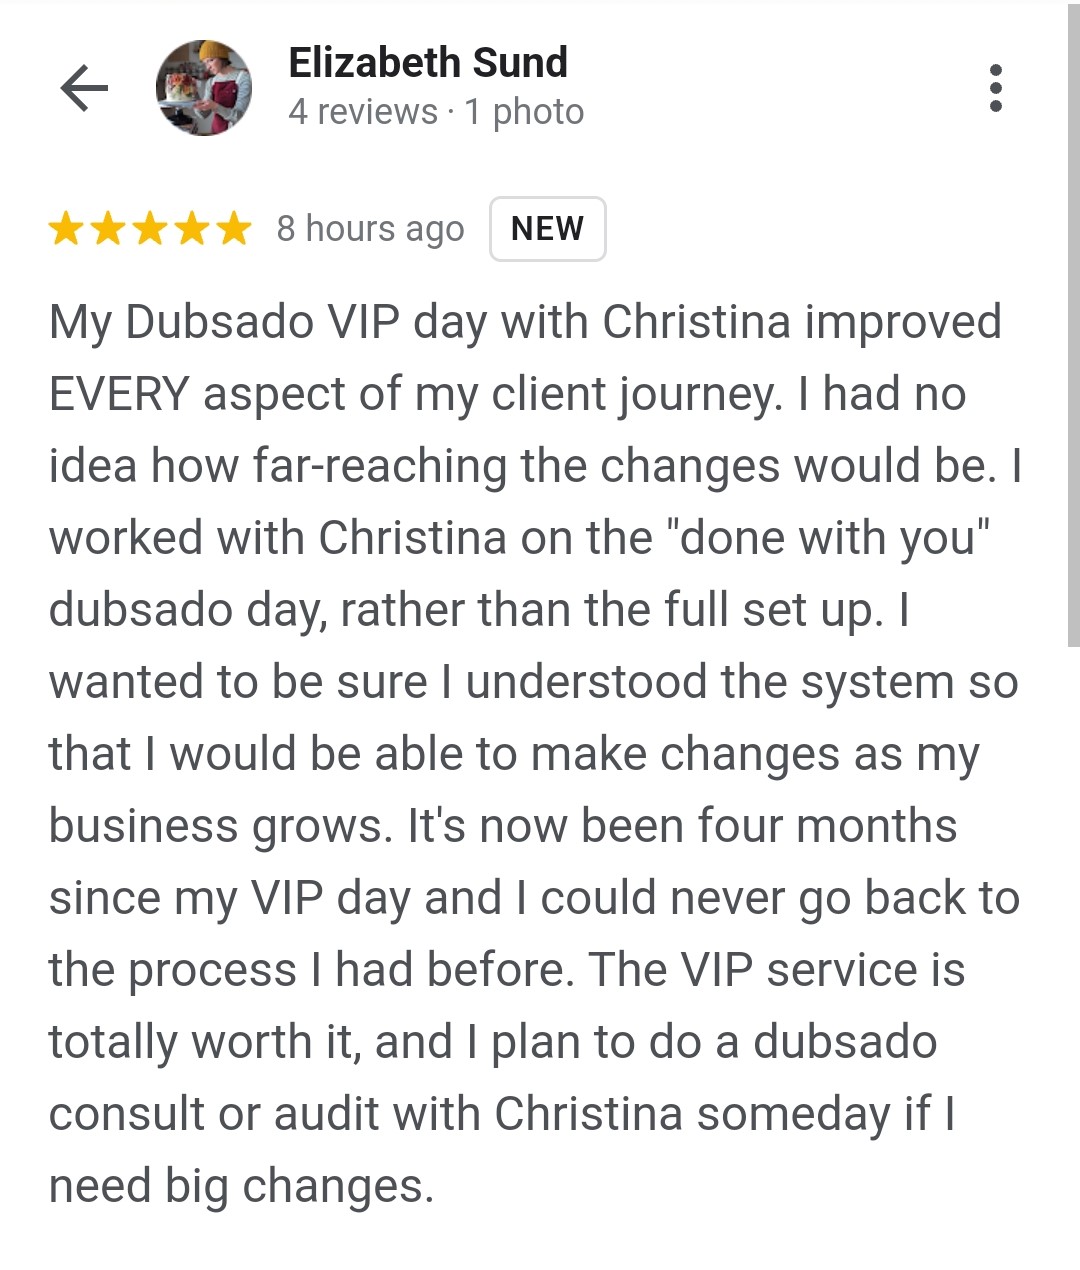 A 5-star Google review from Elizabeth Sund. The review reads: "My Dubsado VIP day with Christina improved EVERY aspect of my client journey. I had no idea how far-reaching the changes would be. I worked with Christina on the "done with you" dubsado day, rather than the full set up. I wanted to be sure I understood the system so that I would be able to make changes as my business grows. It's now been four months since my VIP day and I could never go back to the process I had before. The VIP service is totally worth it, and I plan to do a dubsado consult or audit with Christina someday if I need big changes."